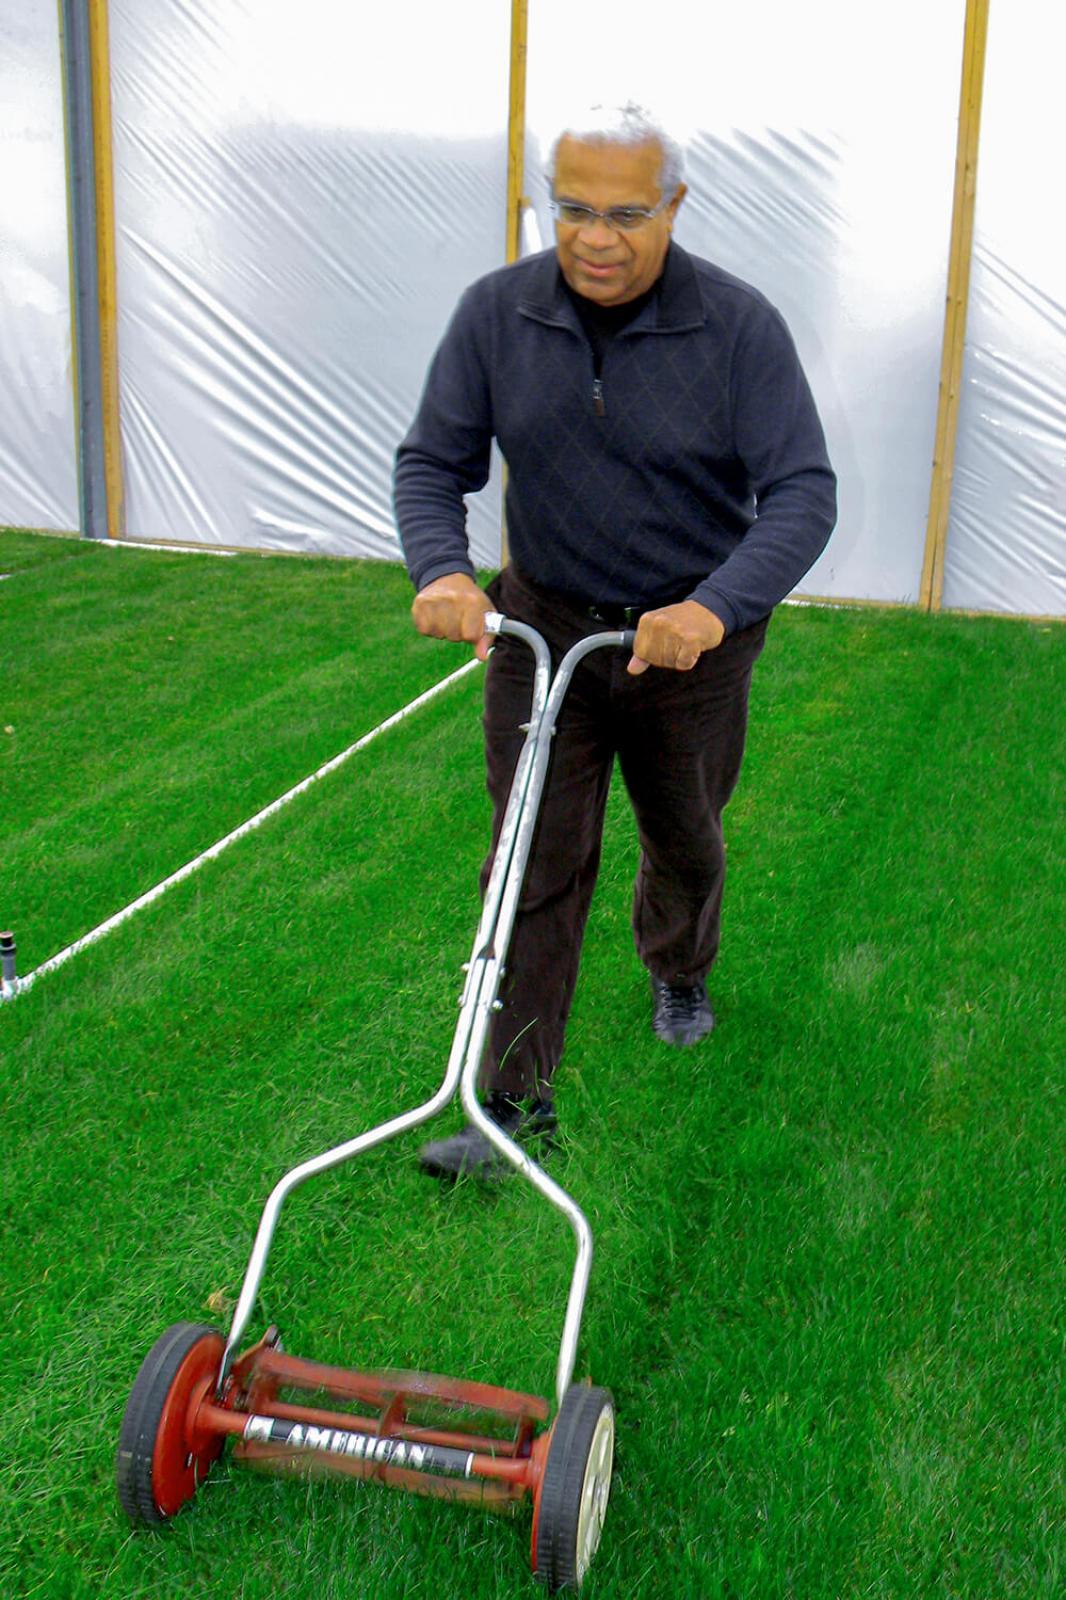 In the LO greenhouses in Milton, volunteer Don Voorhees cuts grass that will be used in LO’s Canada Blooms garden.